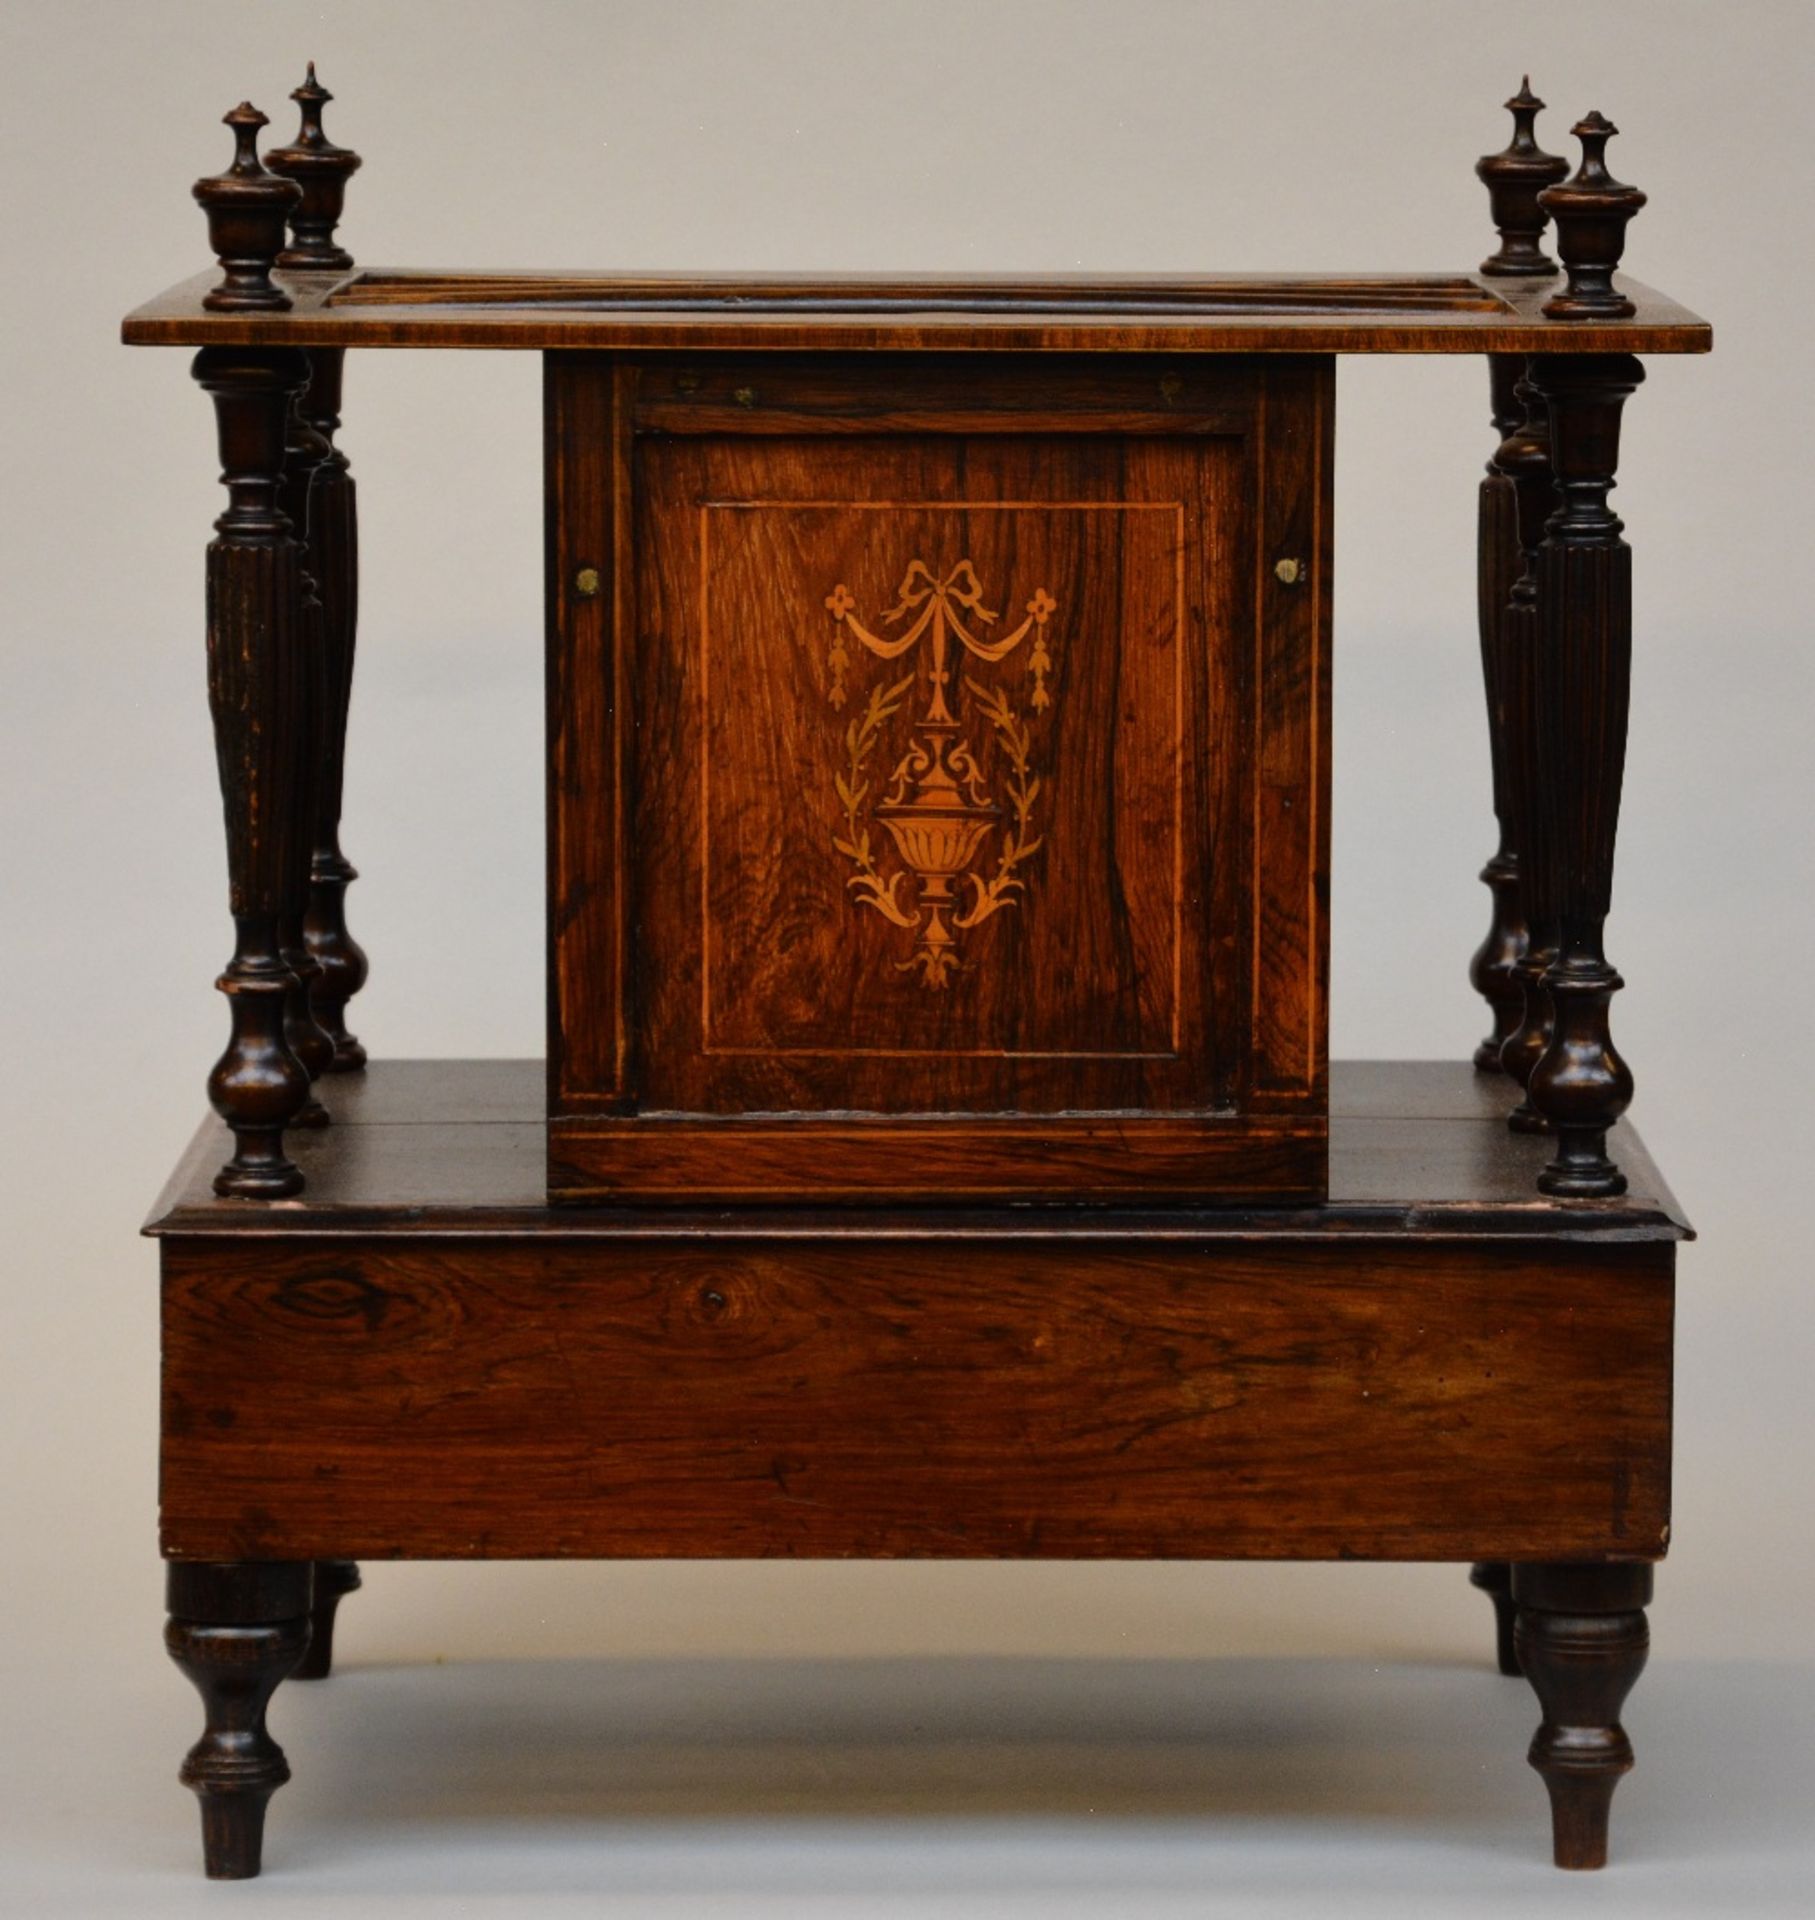 A 19thC rosewood and marquetry Canterbury, H 58,5 - W 49,5 - D 38 cm - Bild 3 aus 4